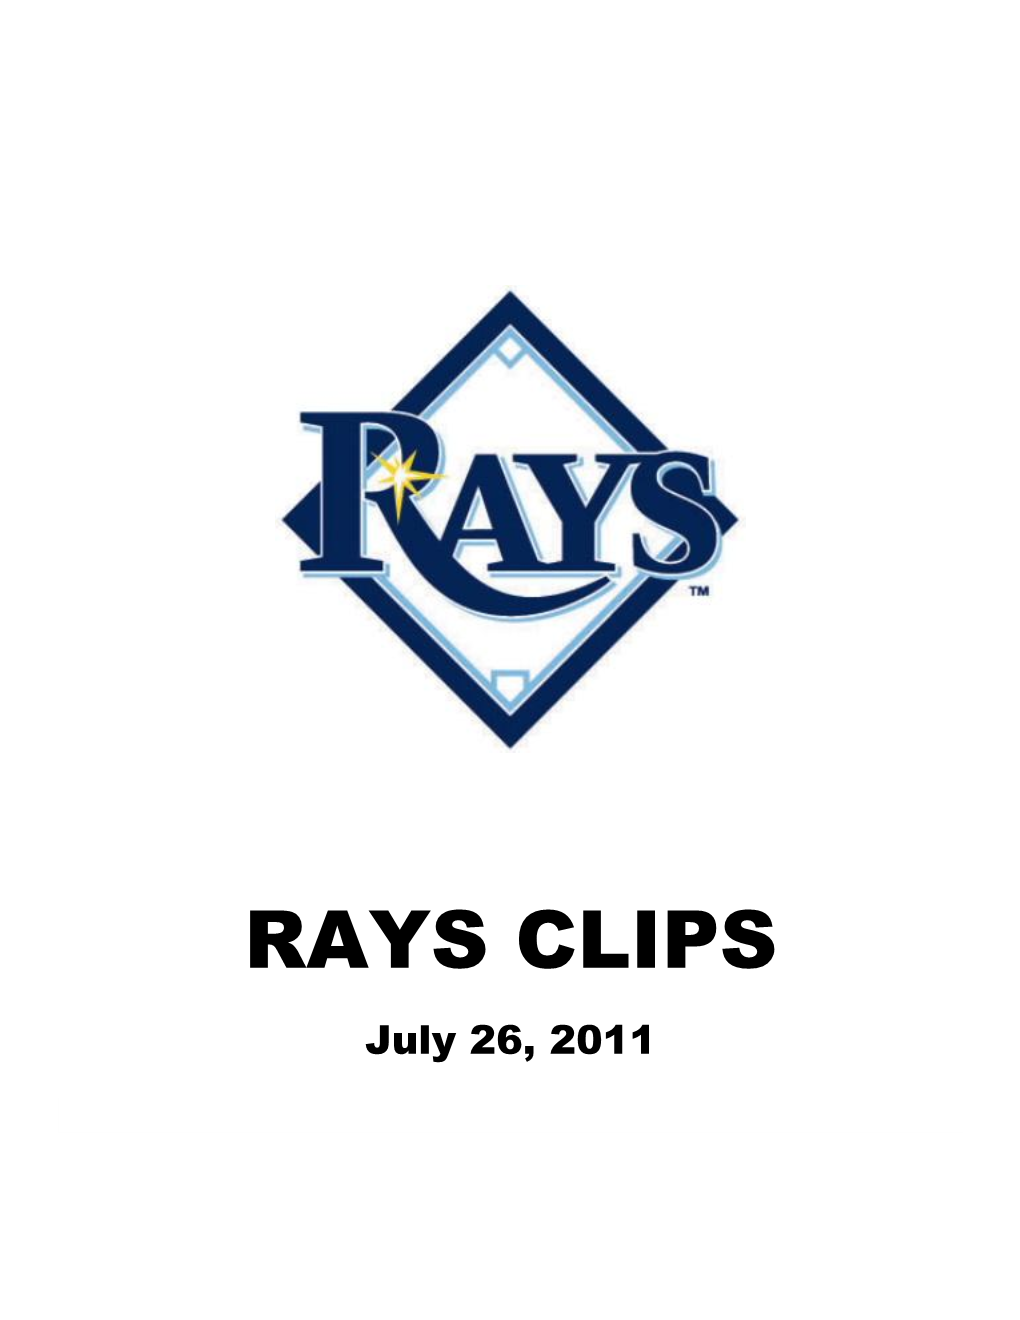 RAYS CLIPS July 26, 2011